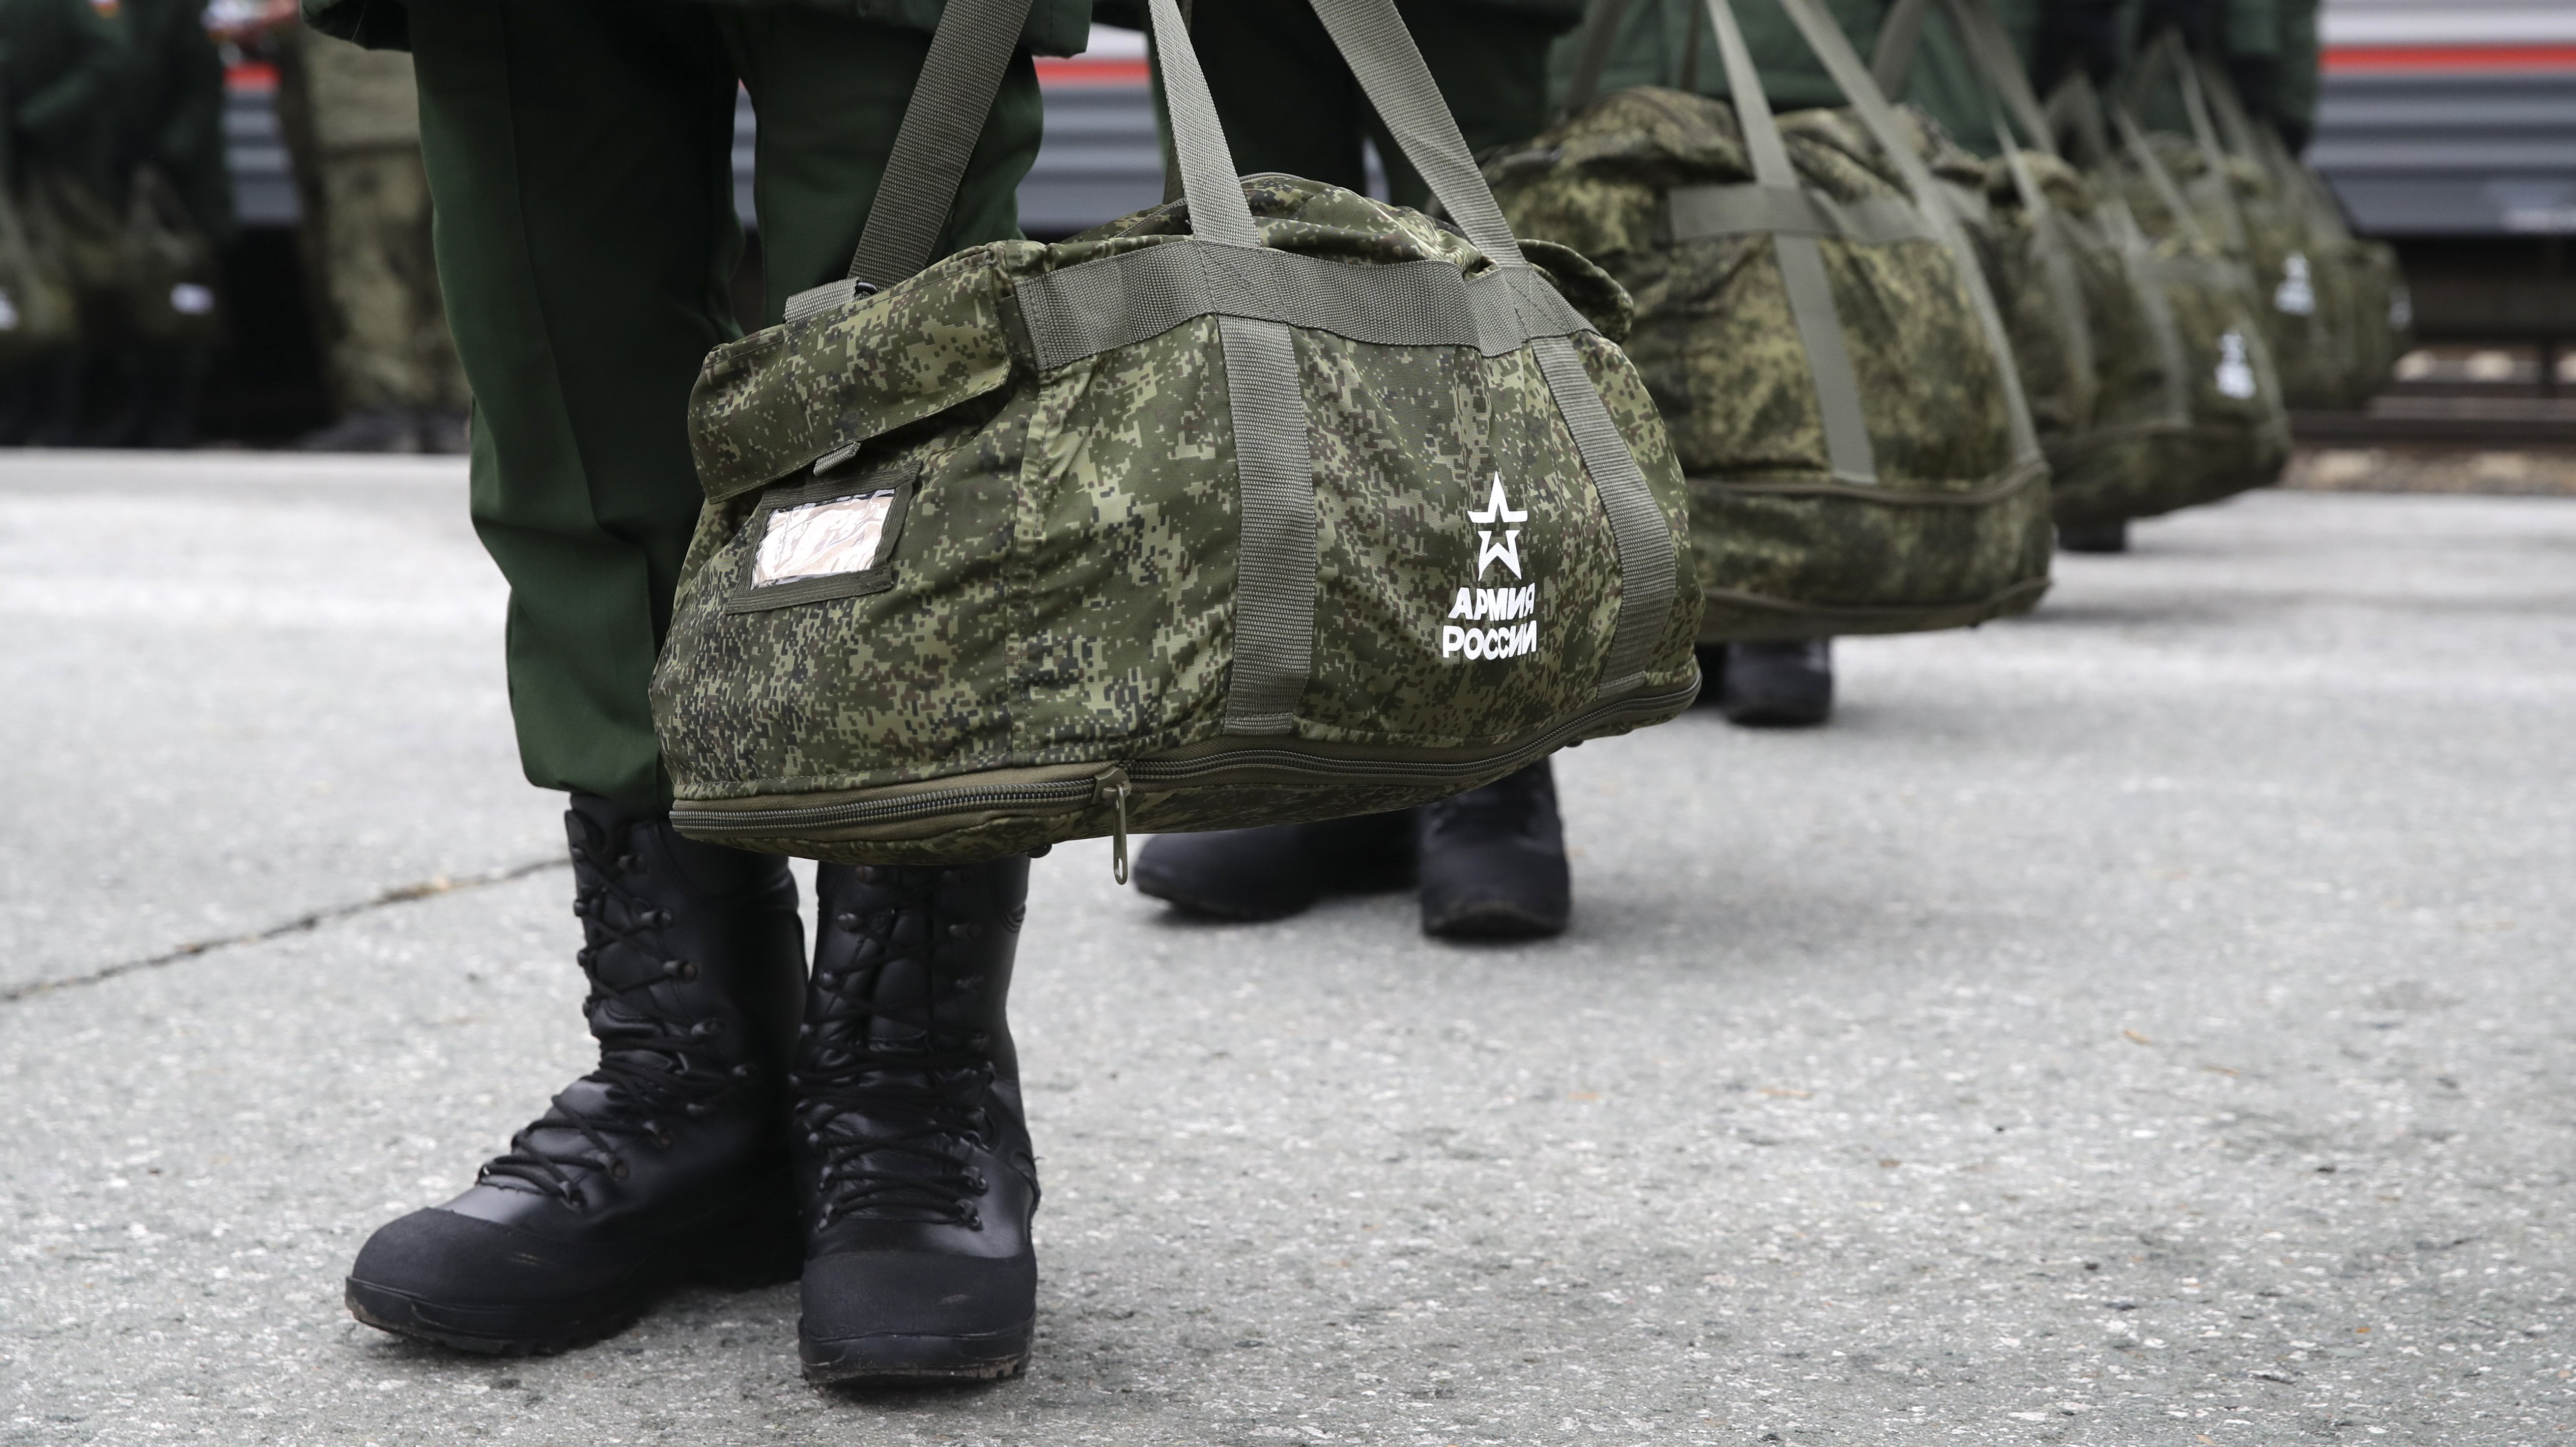 Russian conscripts depart from Novosibirsk for military service